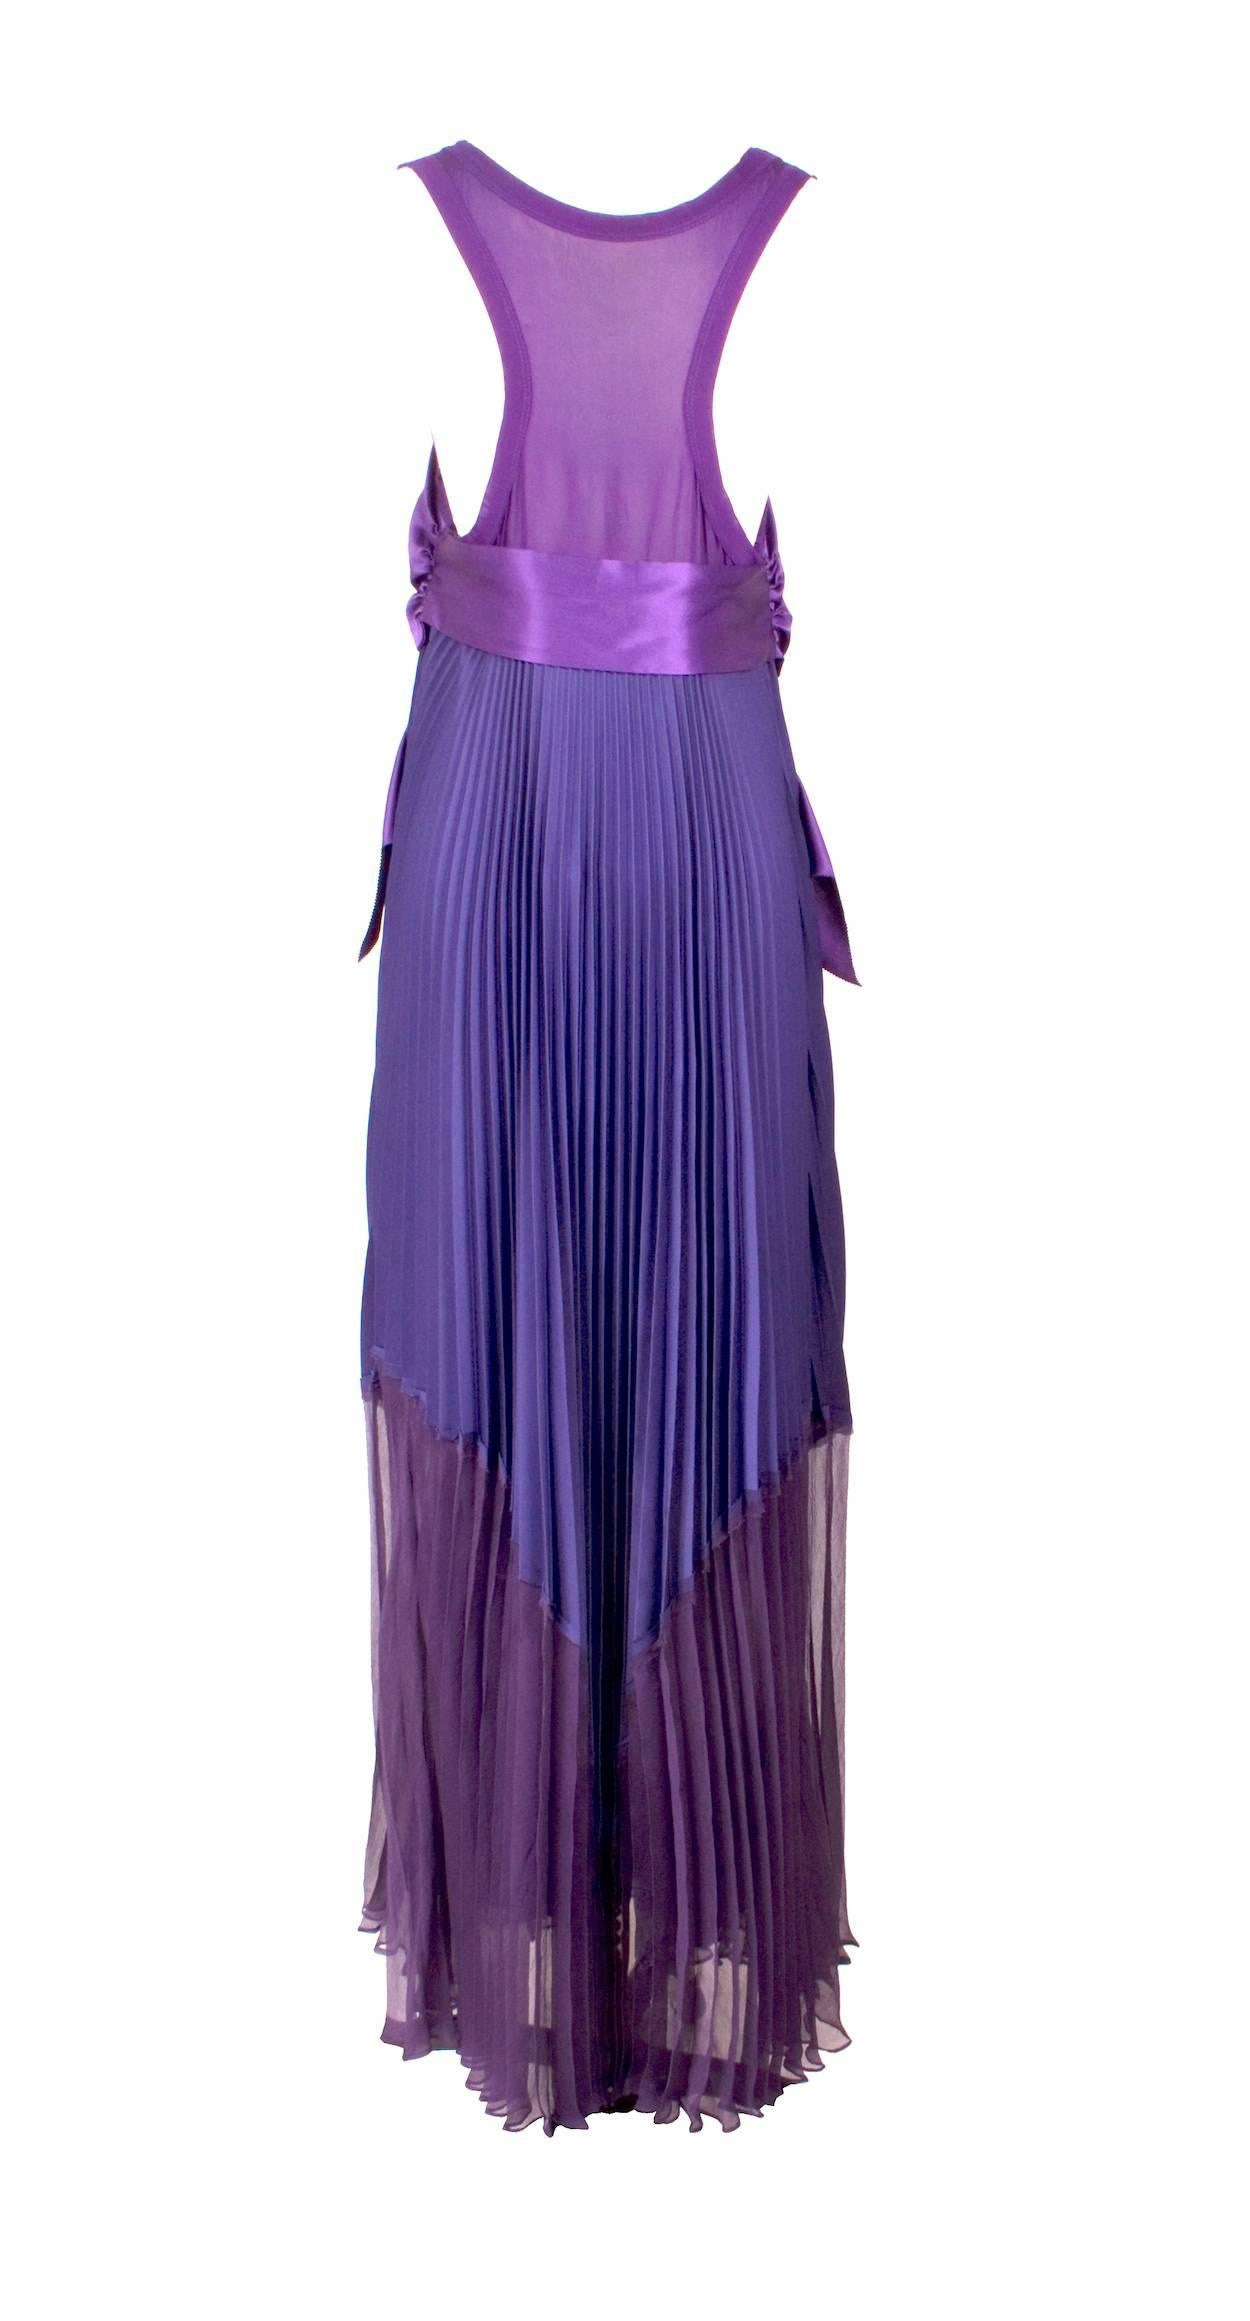 This is a purple dress by Jean Paul Gaultier c. 1990s.  It features a large silk satin bow in front as well as a sheer silk bodice and pleated chiffon skirt.  